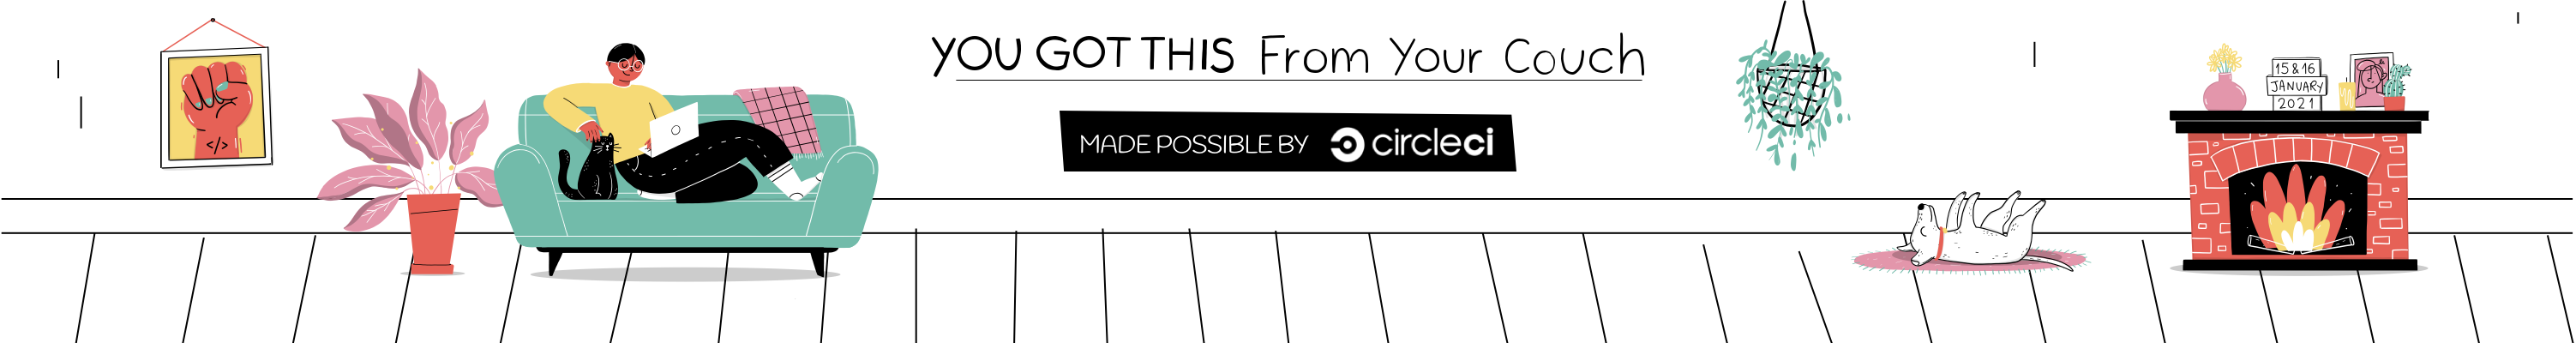 You Got This From Home Made Possible By CircleCI. January 15 & 16 2021.